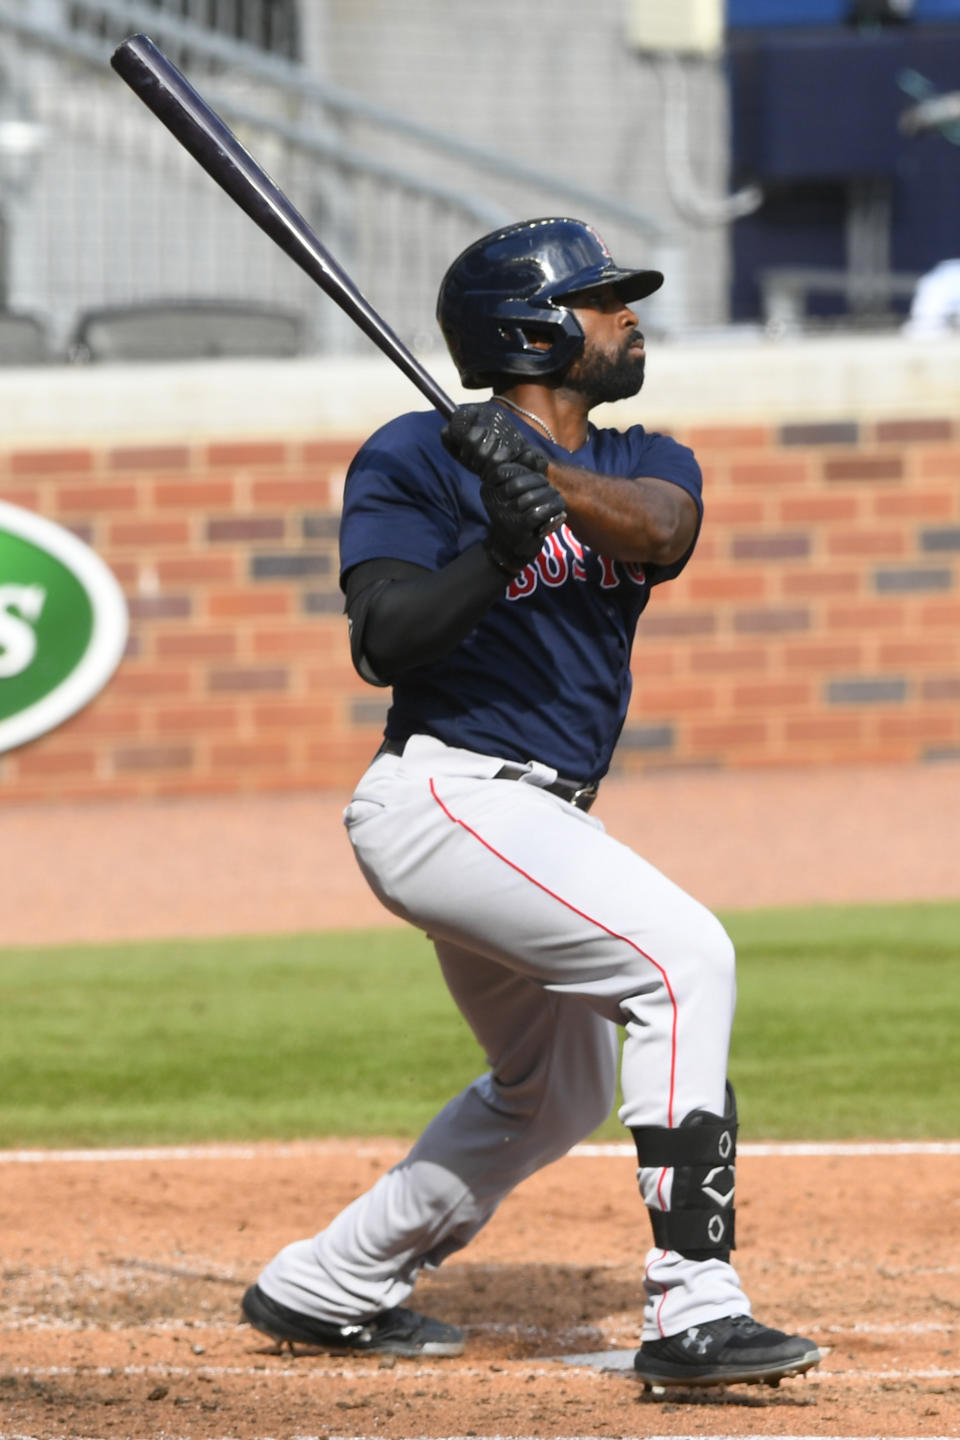 Boston Red Sox's Jackie Bradley Jr. watches his line drive soar to center field for a home run against the Atlanta Braves during the fourth inning of a baseball game Sunday, Sept. 27, 2020, in Atlanta. (AP Photo/John Amis)